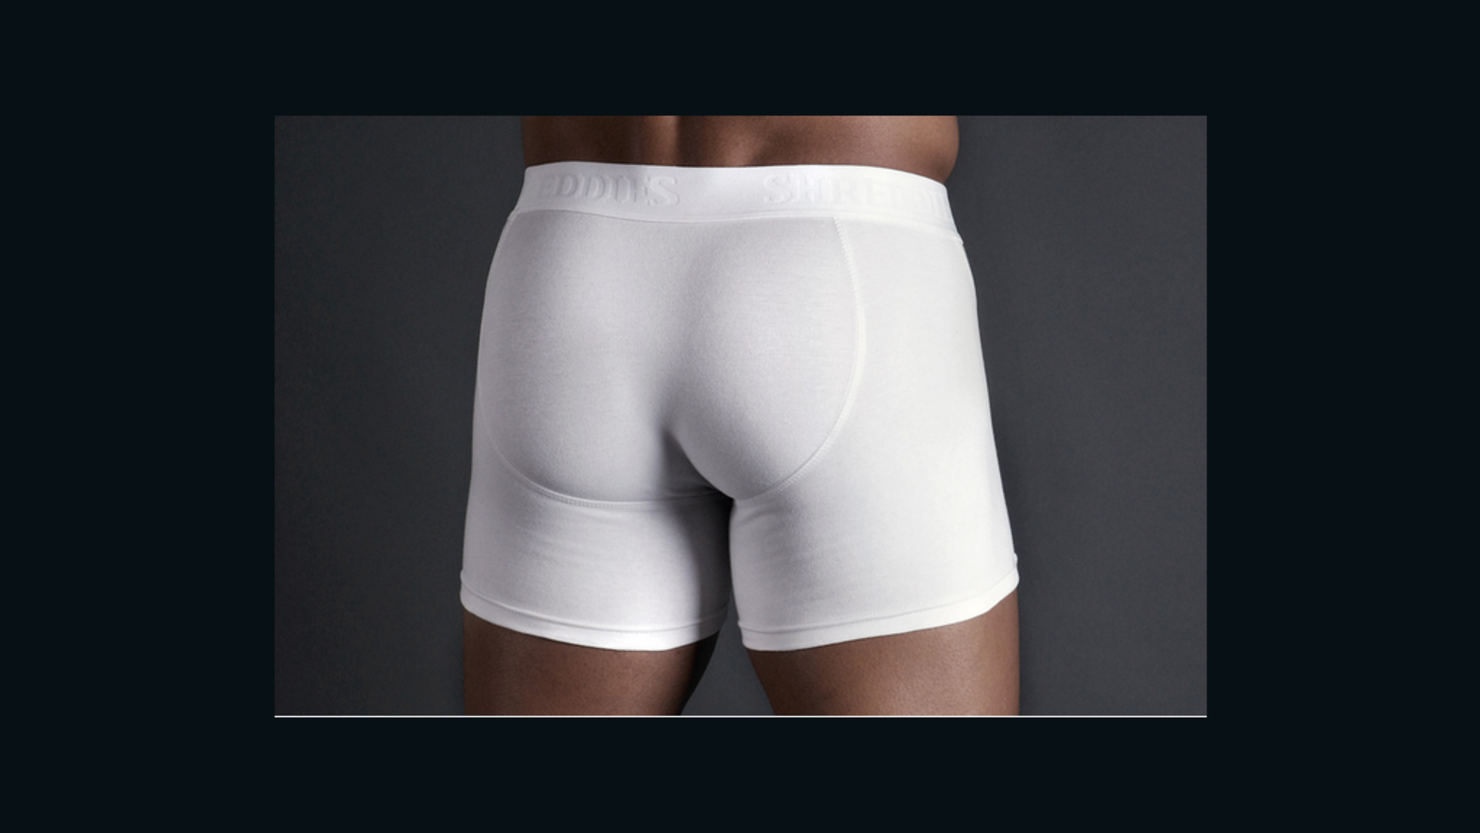 Apparently This Matters: Fart-filtering underwear